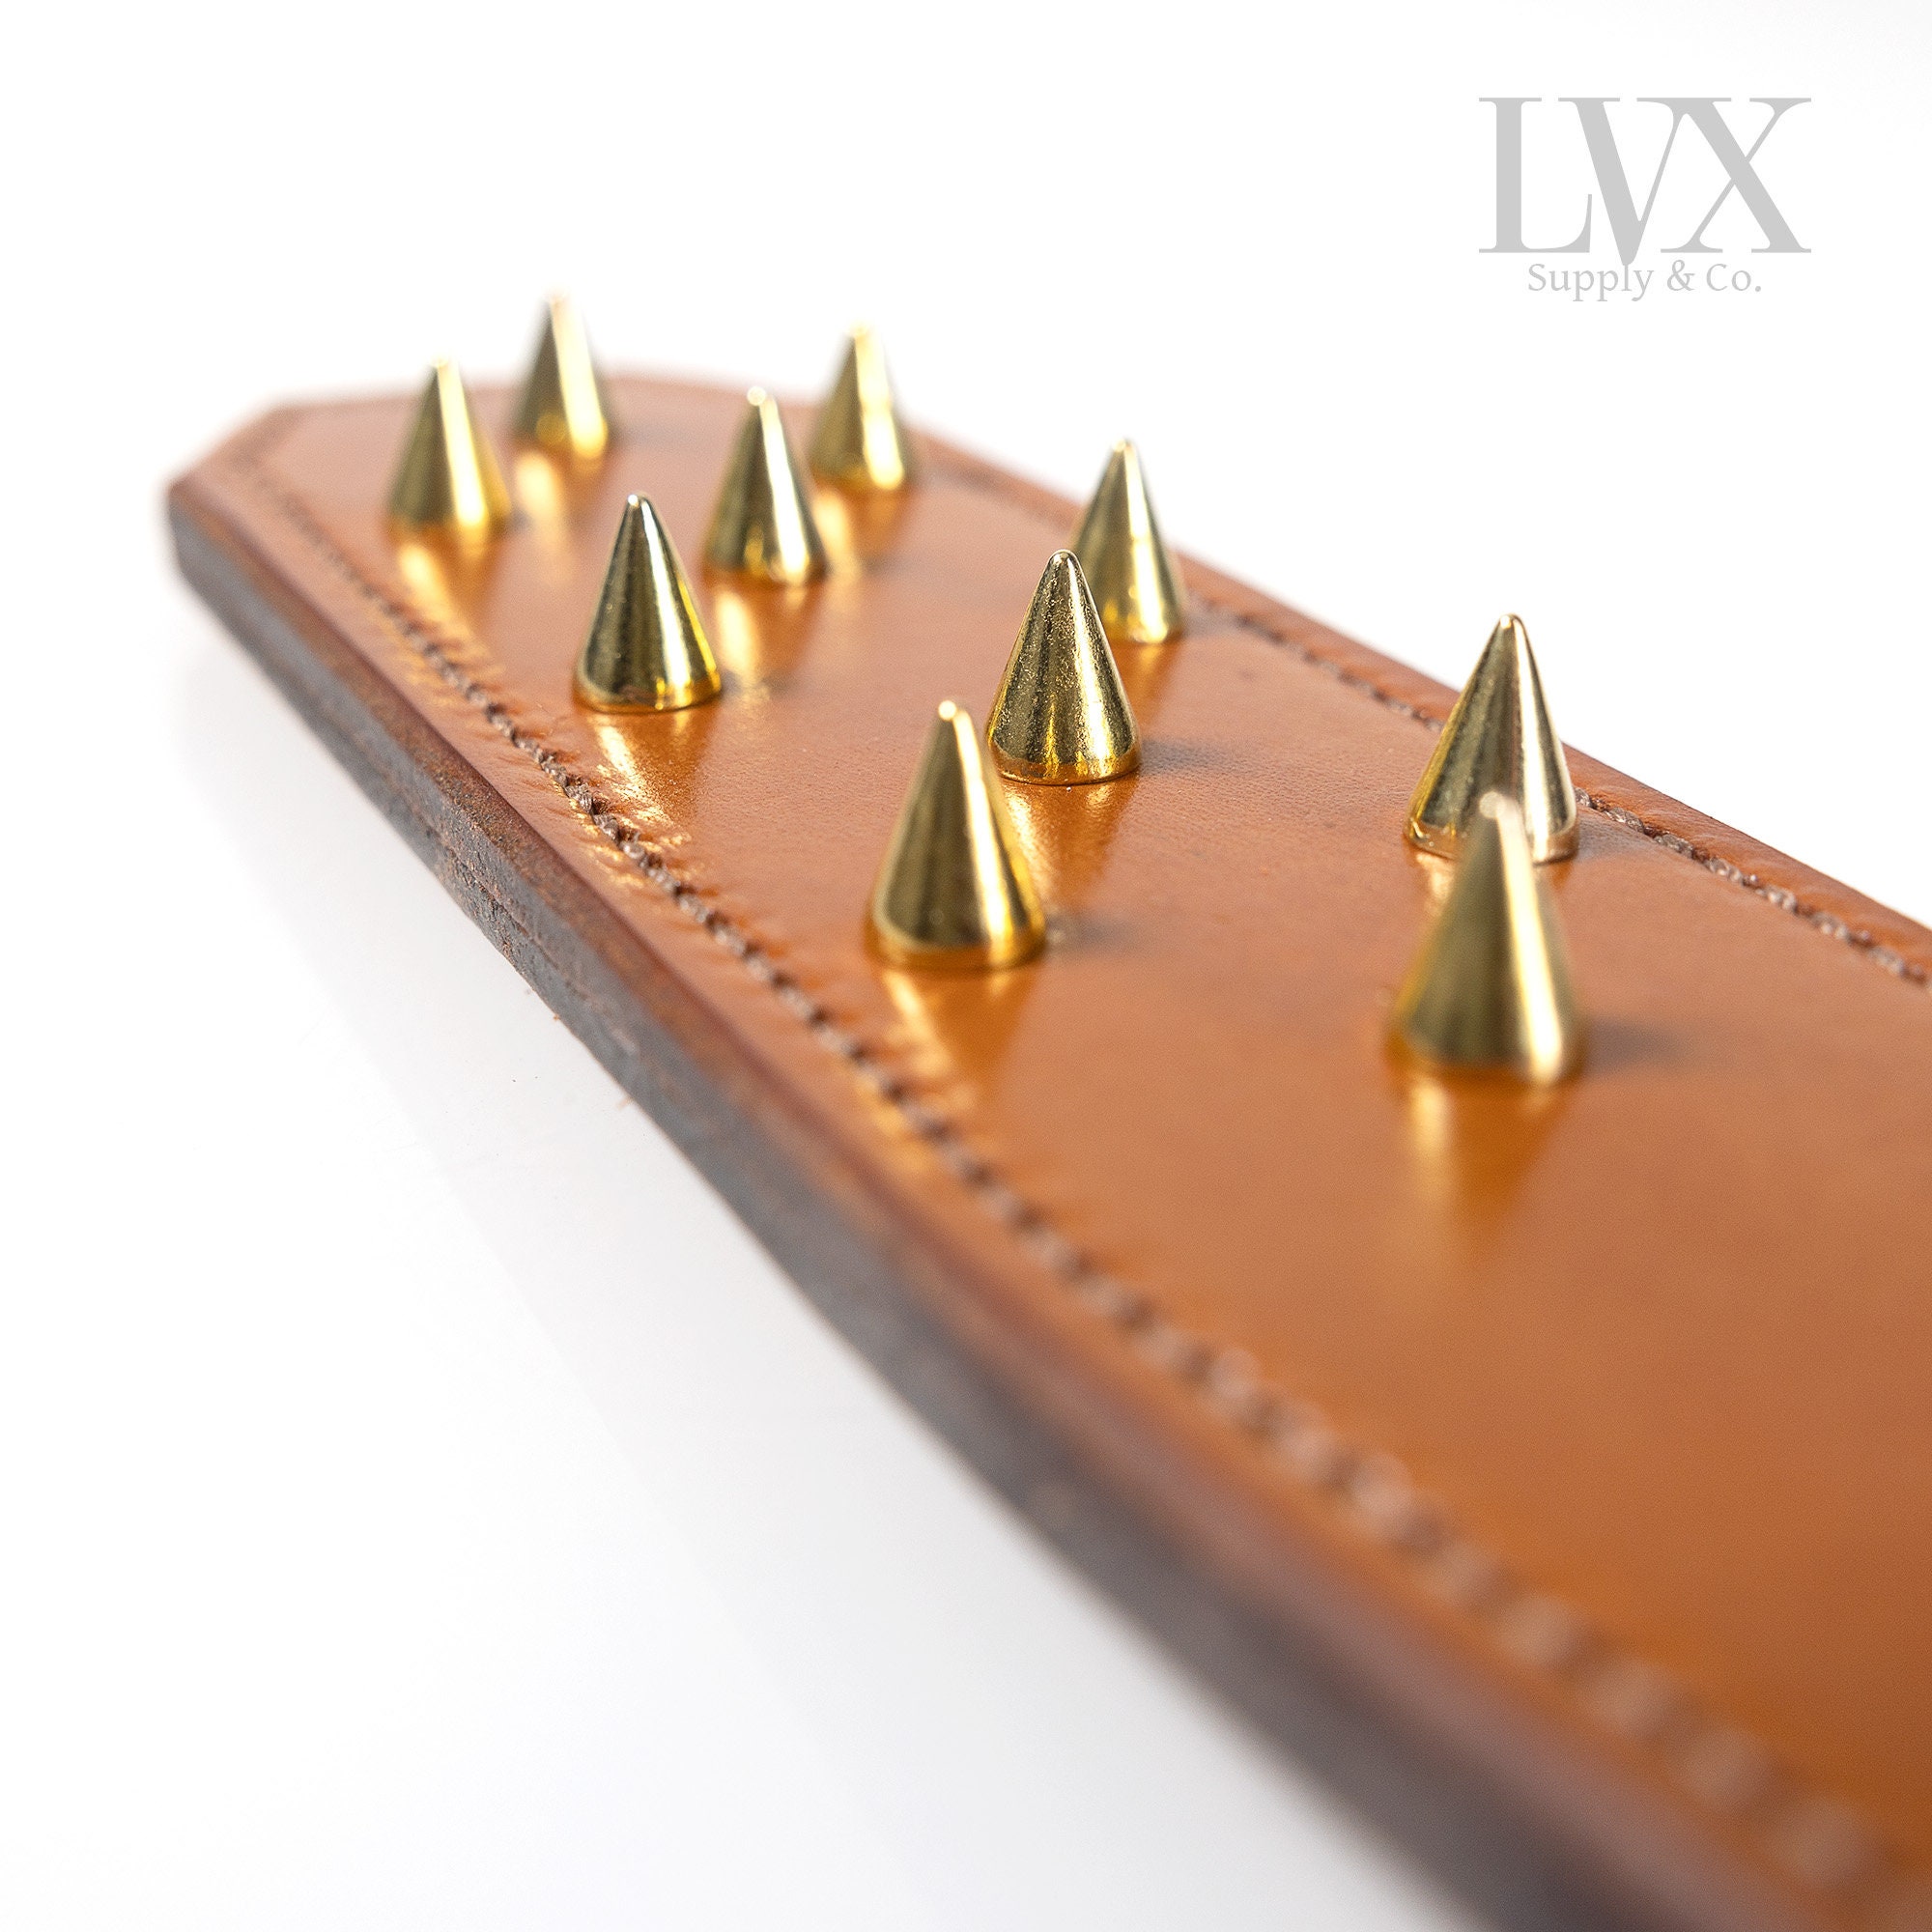 Studded Leather Spanking Paddle | Spiked Tawse Strap Paddle, Riding Crop, Spanking Belt, gear for submissive | BDSM Paddle by LVX Supply photo